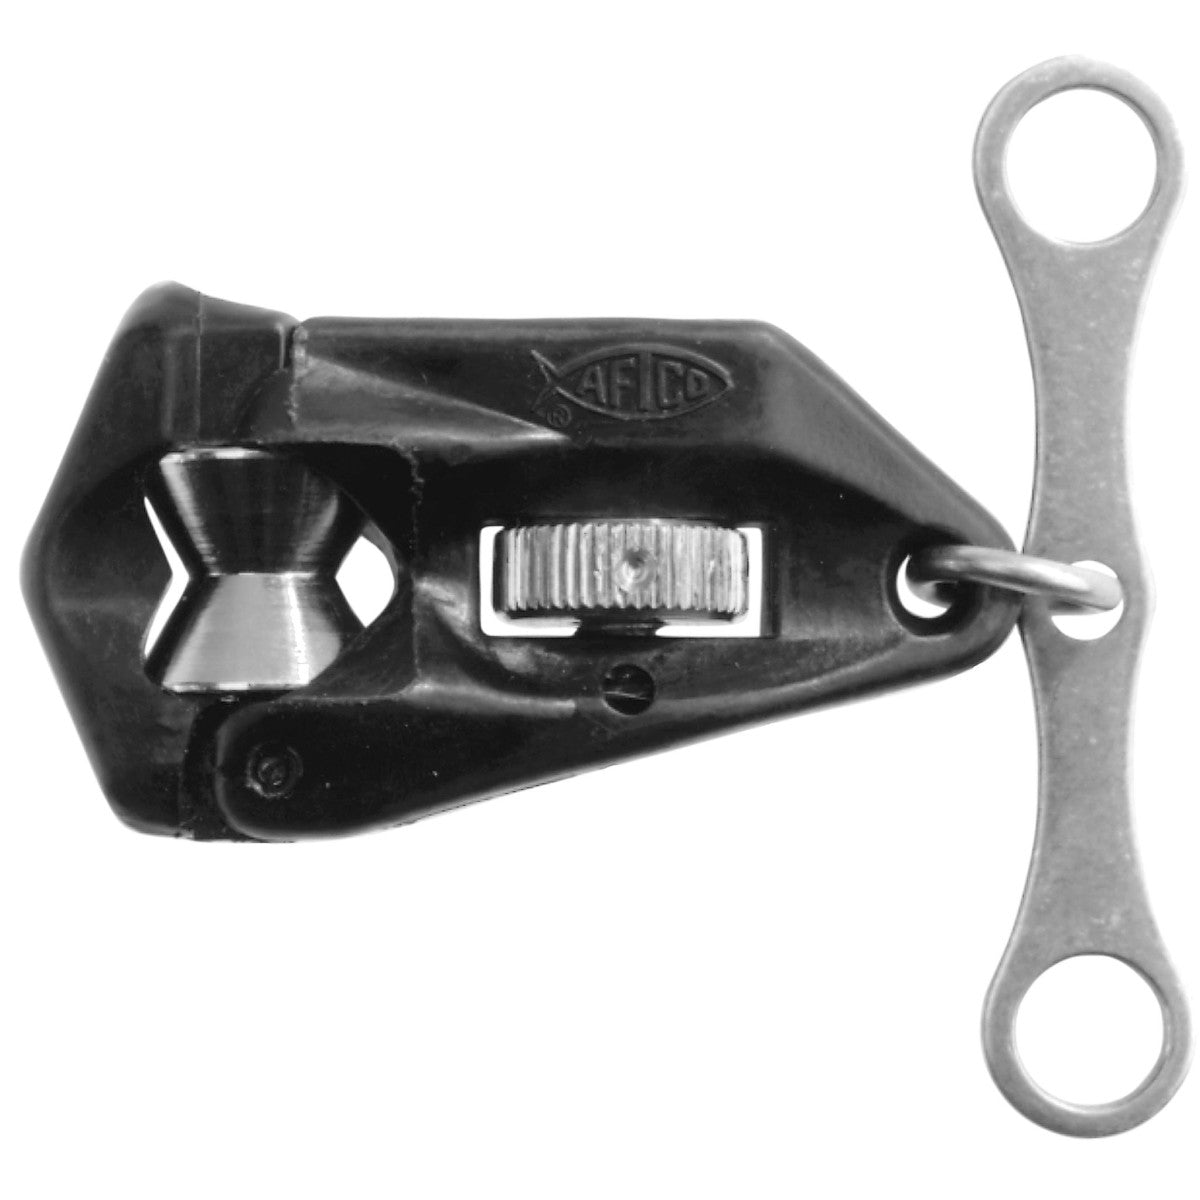 AFTCO Roller Troller Outrigger Clip OR1-Accessories - Game Fishing-AFTCO-Fishing Station